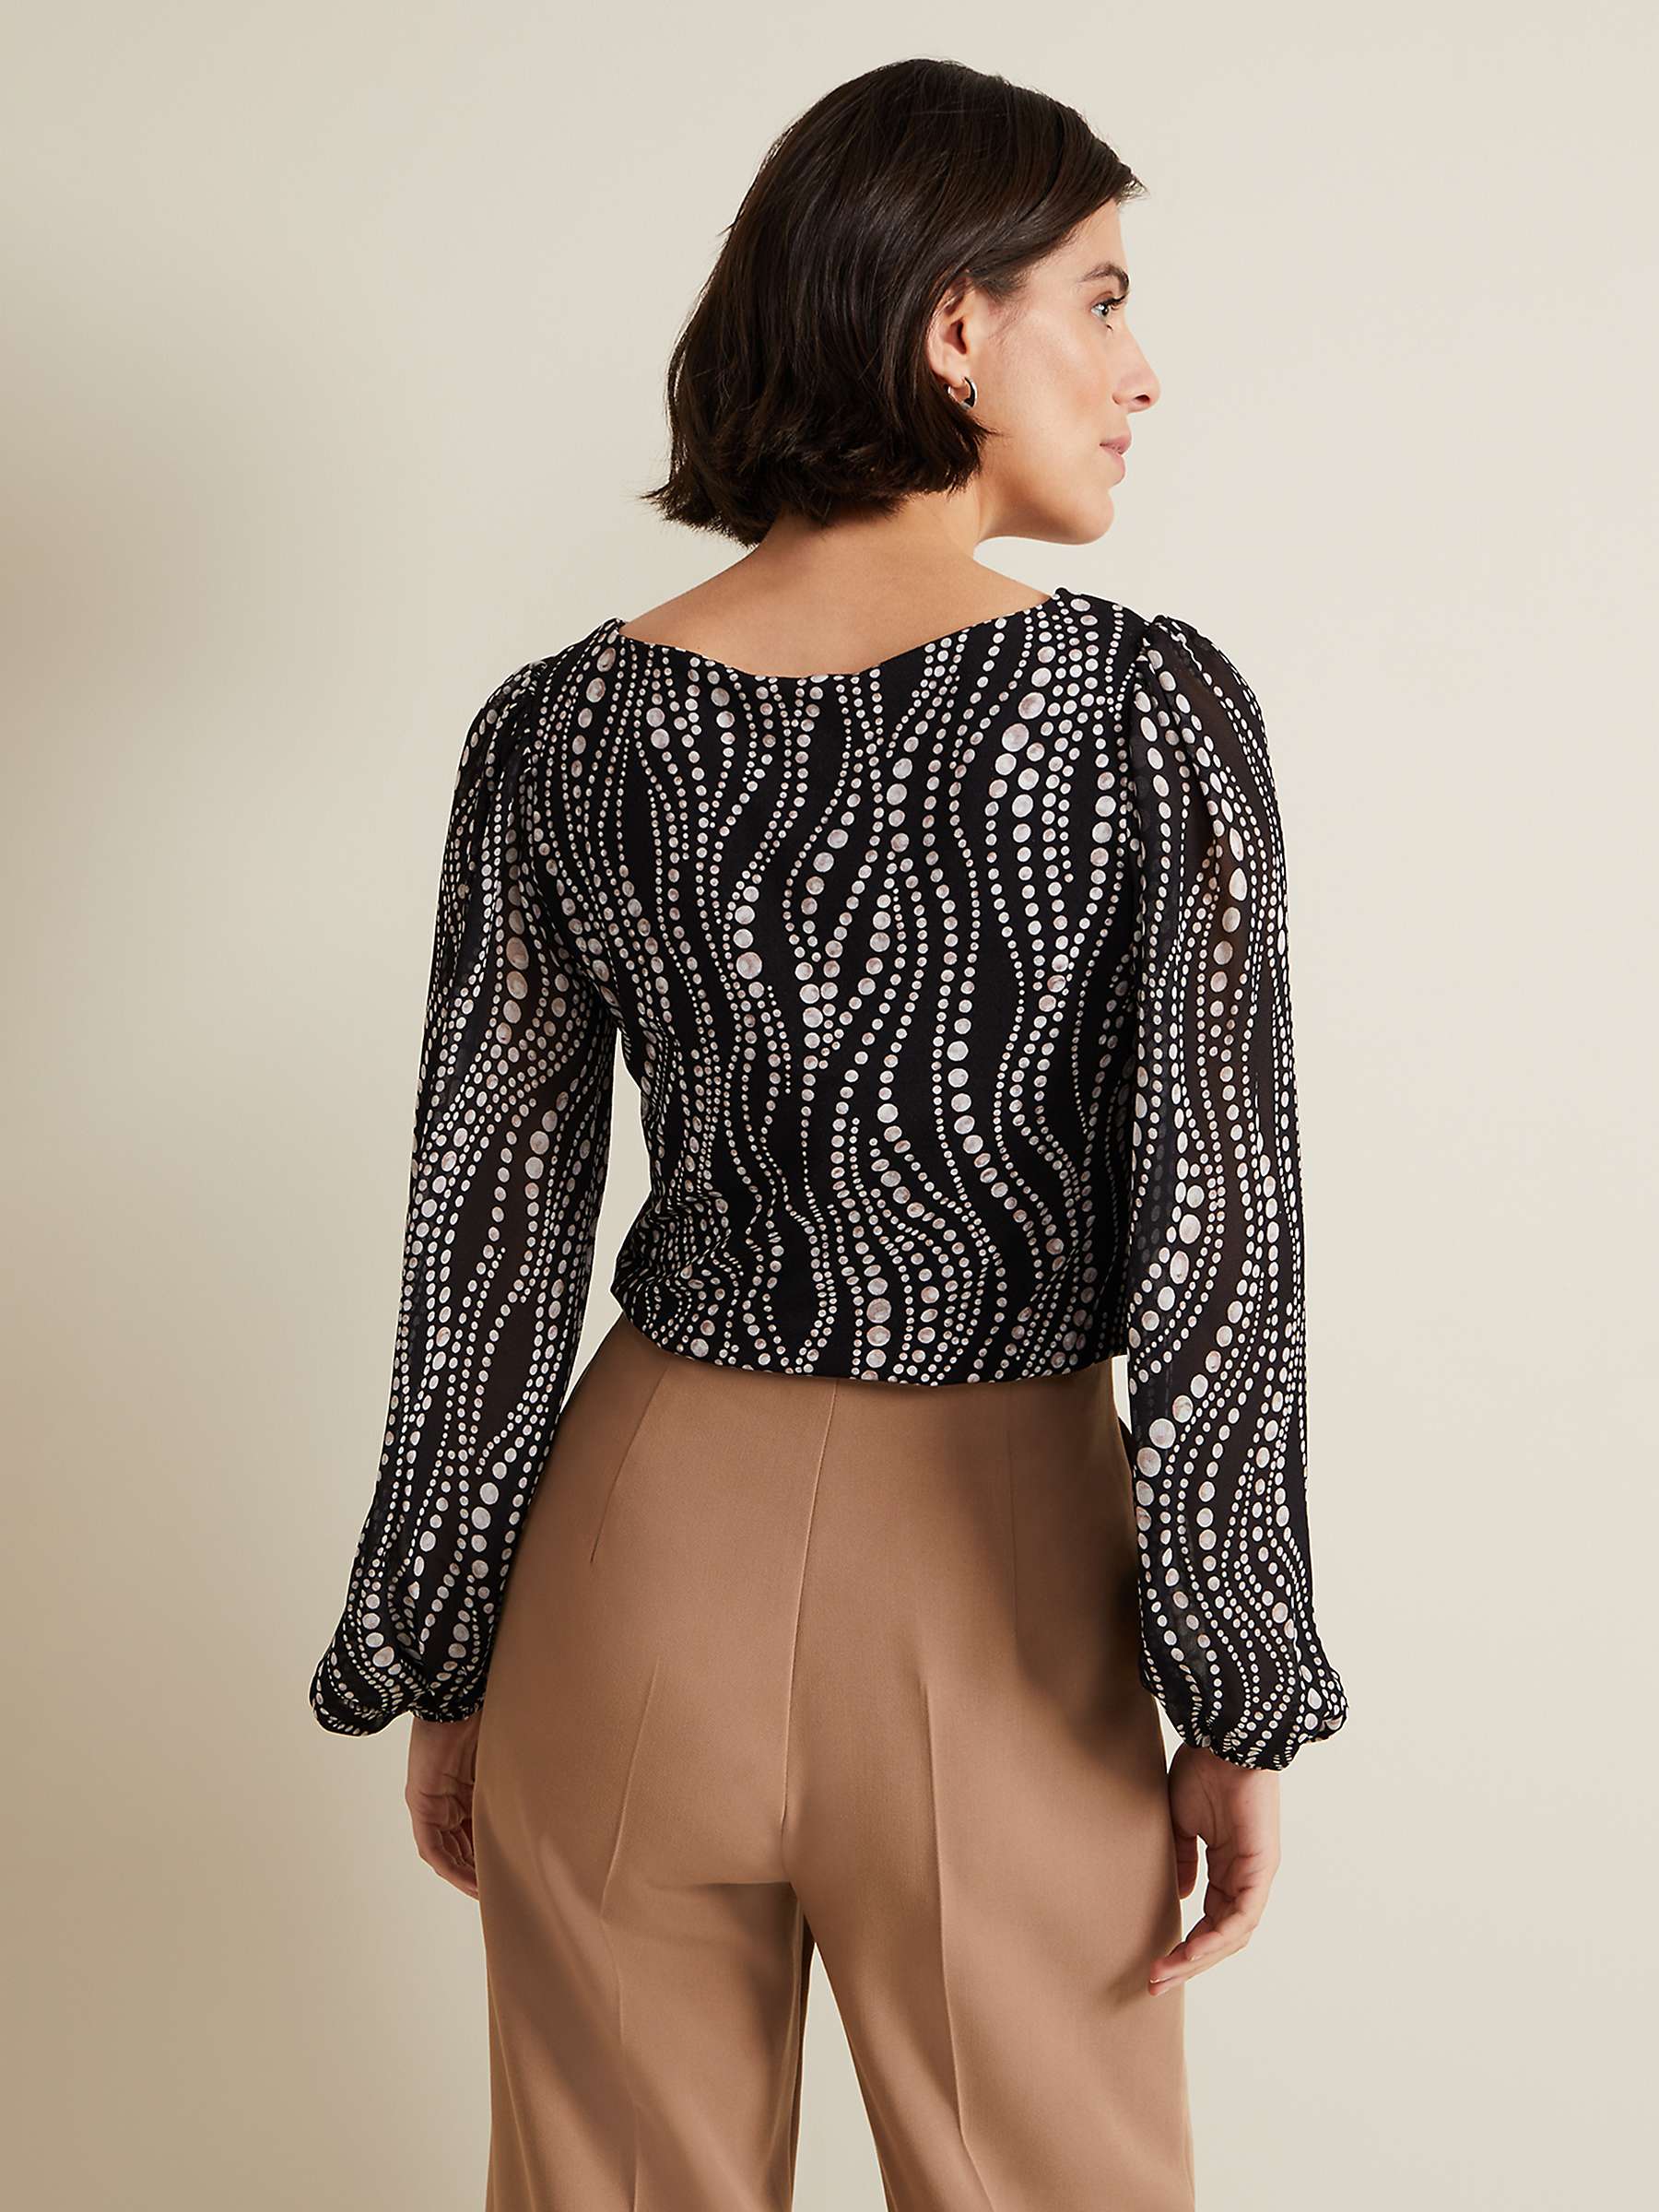 Buy Phase Eight Patricia Pearl Print Blouse, Black Online at johnlewis.com